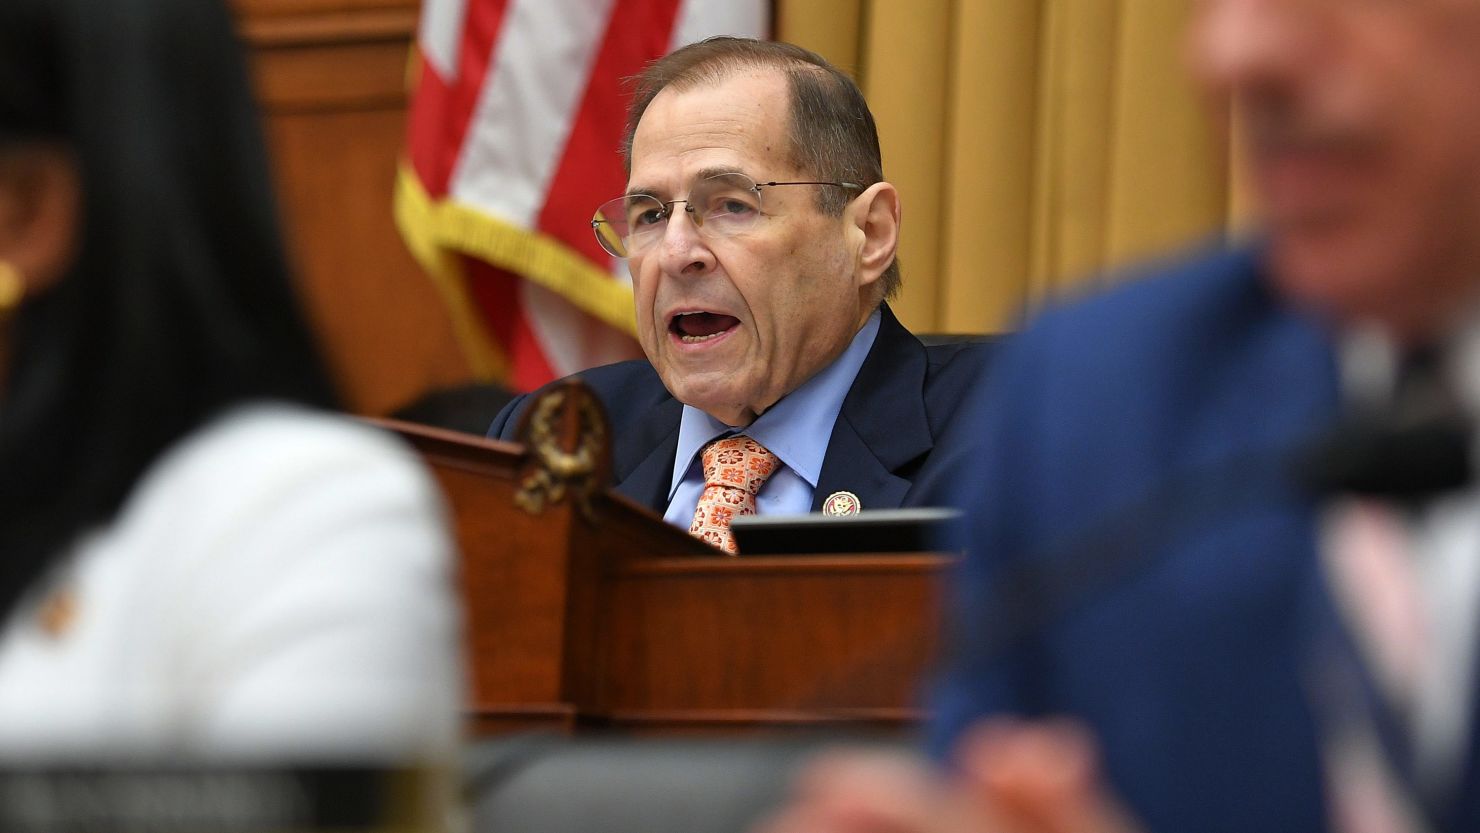 Chairman of the House Judiciary Committee, Rep. Jerry Nadler, speaks during a hearing on Capitol Hill in Washington on May 21, 2019.